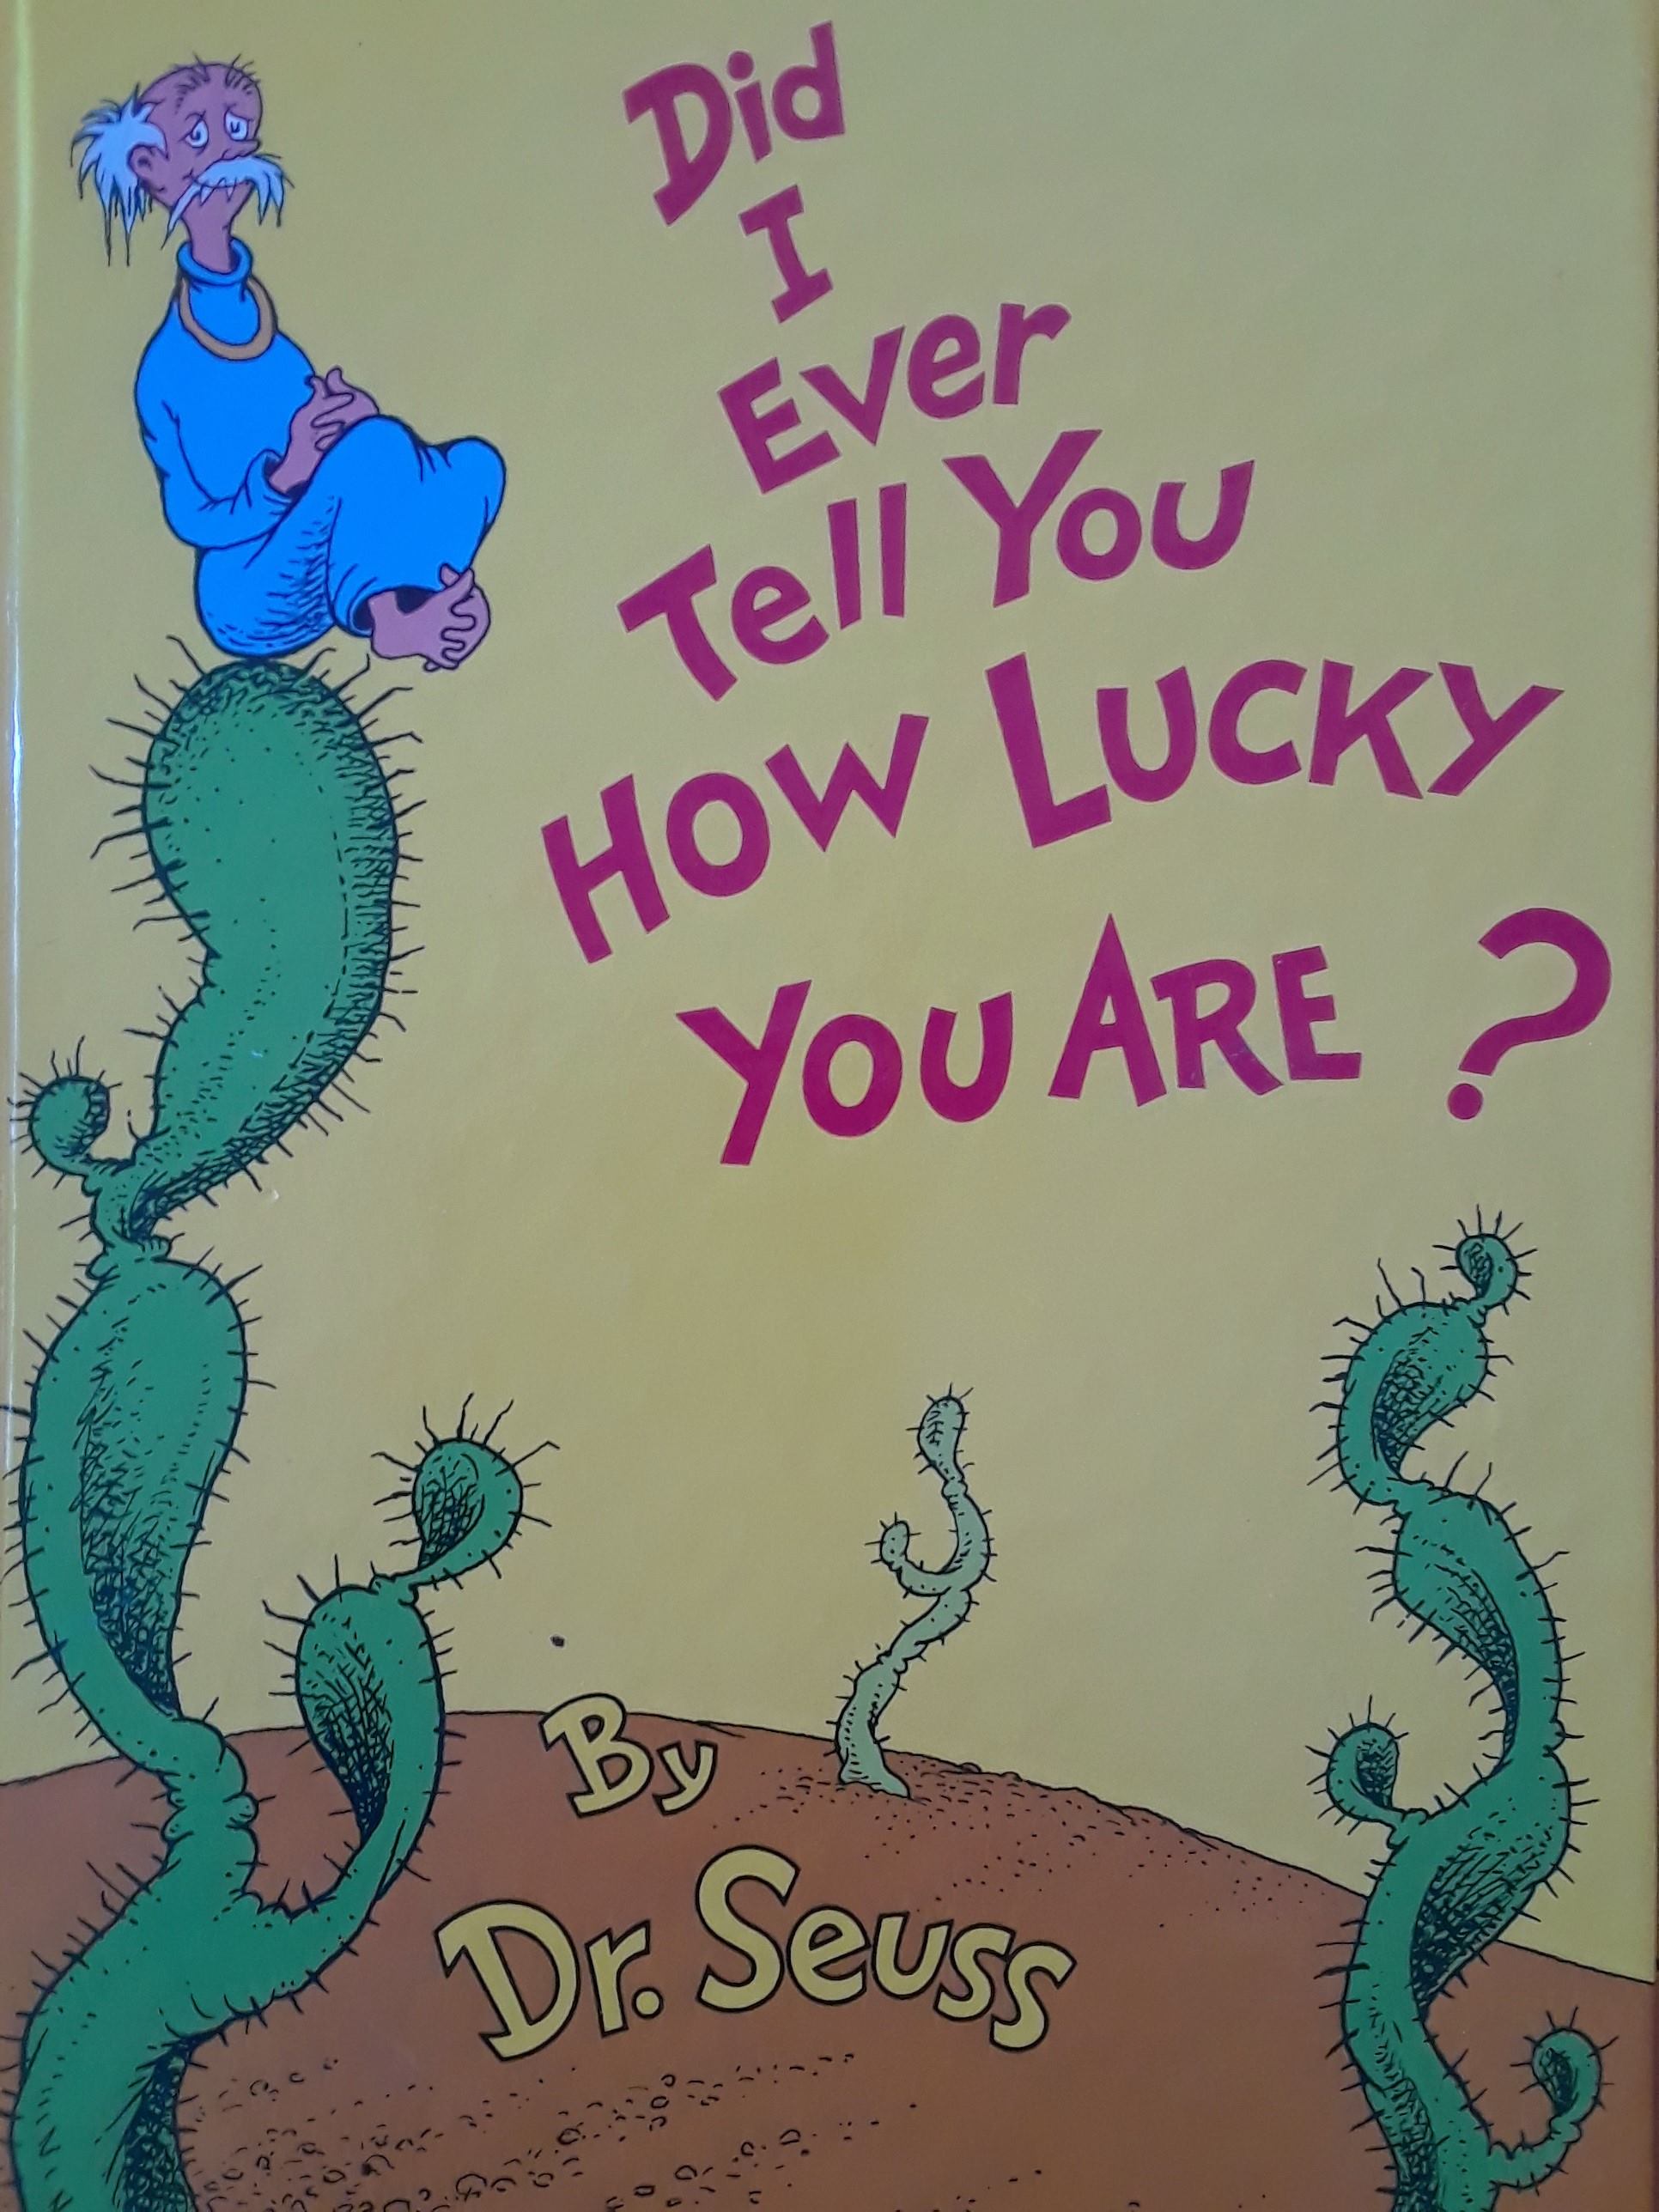 Did I Ever Tell You How Lucky You Are? – Plumfield and Paideia